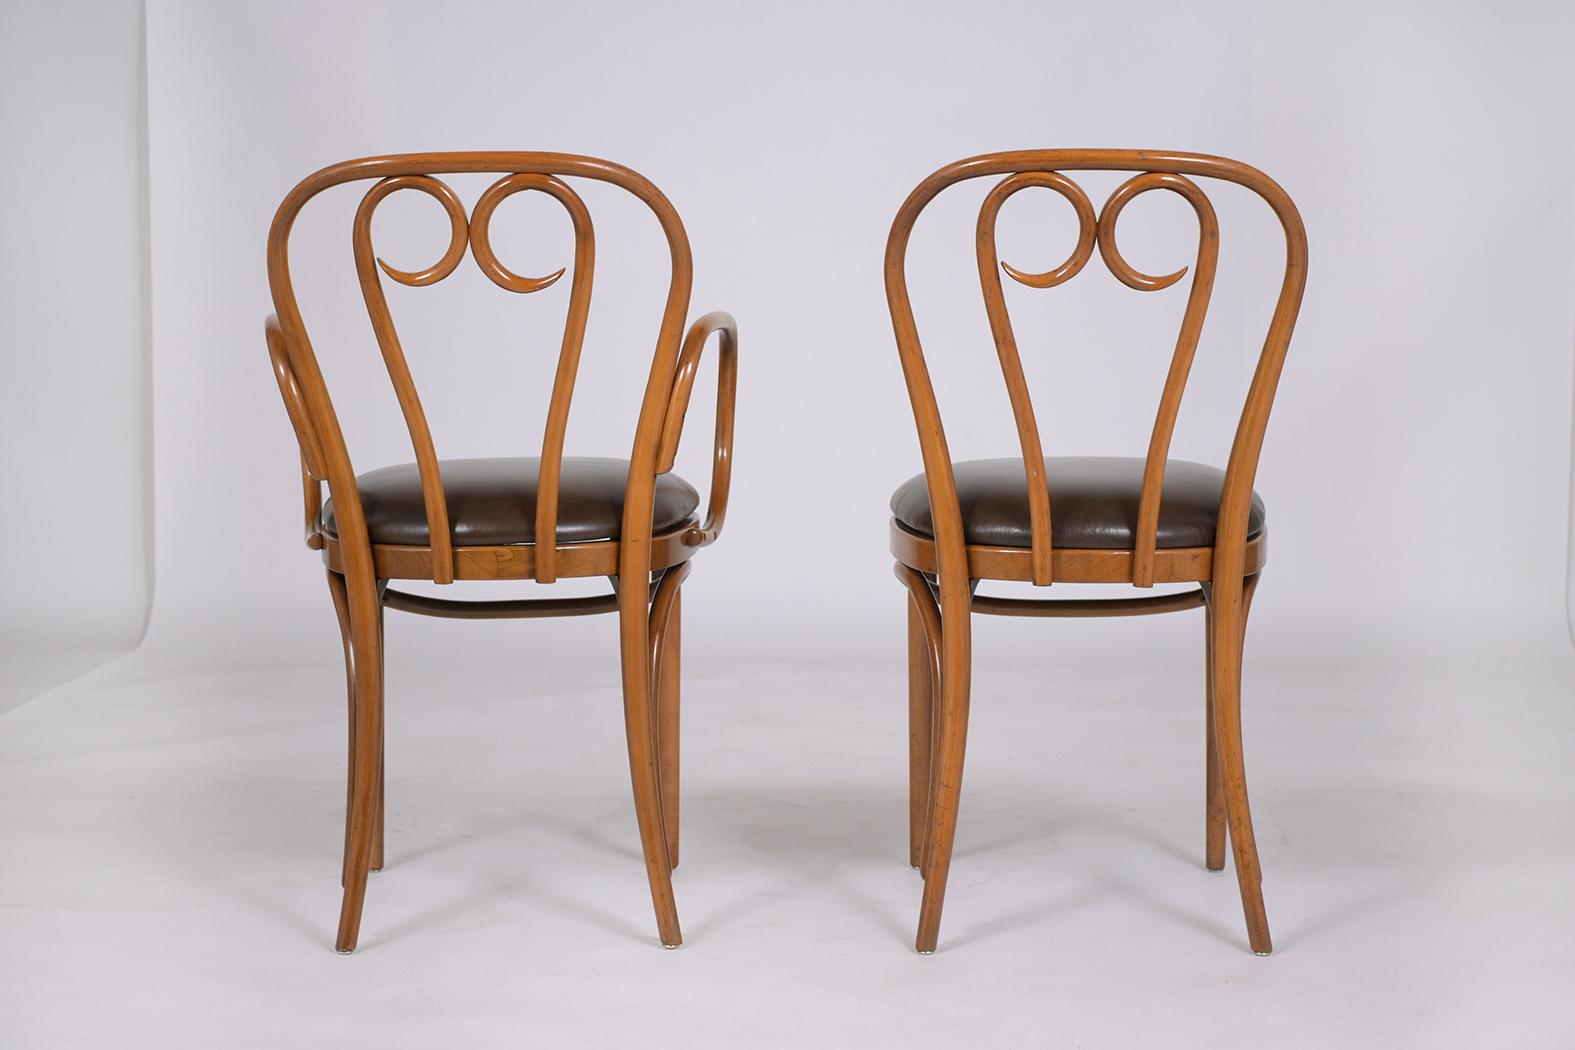 Art-Deco Thonet Bentwood Leather Dining Chairs with Walnut Finish - Set of Six For Sale 6